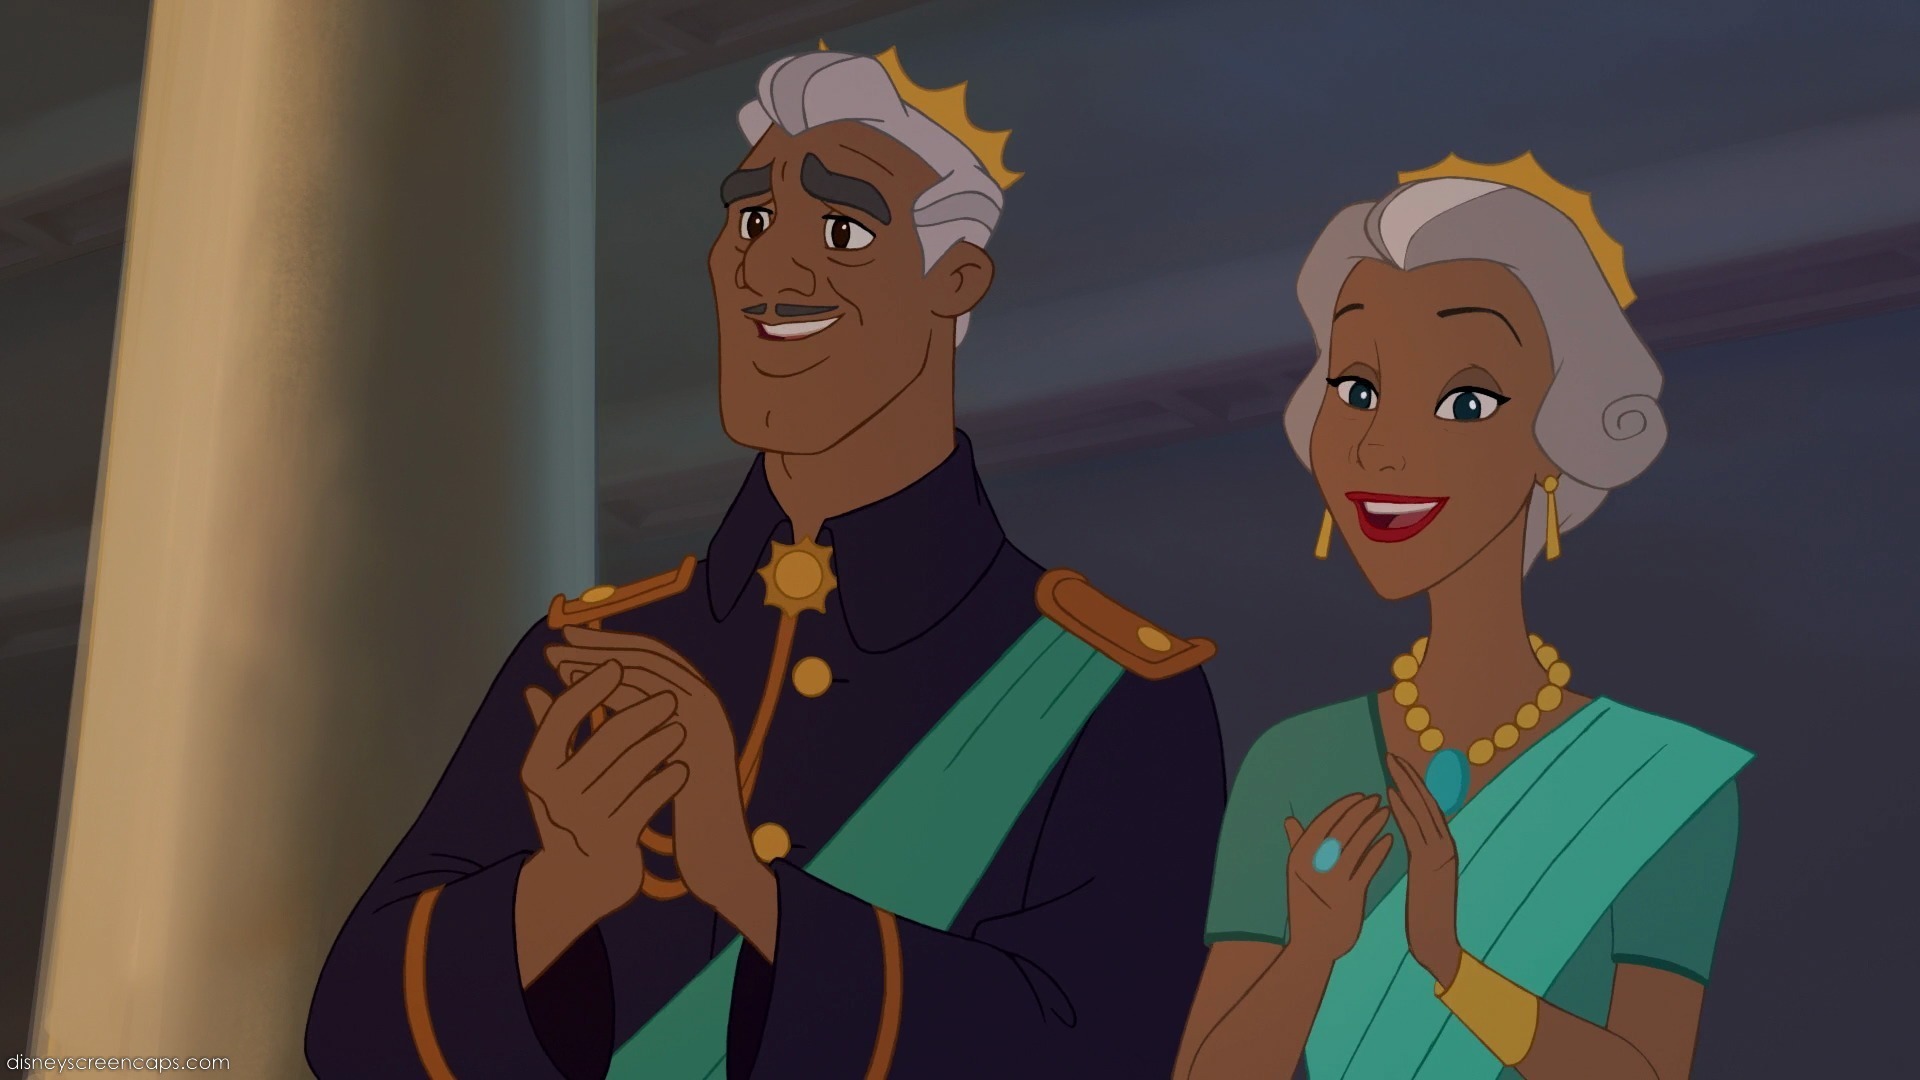 The-King-and-Queen-of-Maldonia-disney-21255837-1920-1080.jpg